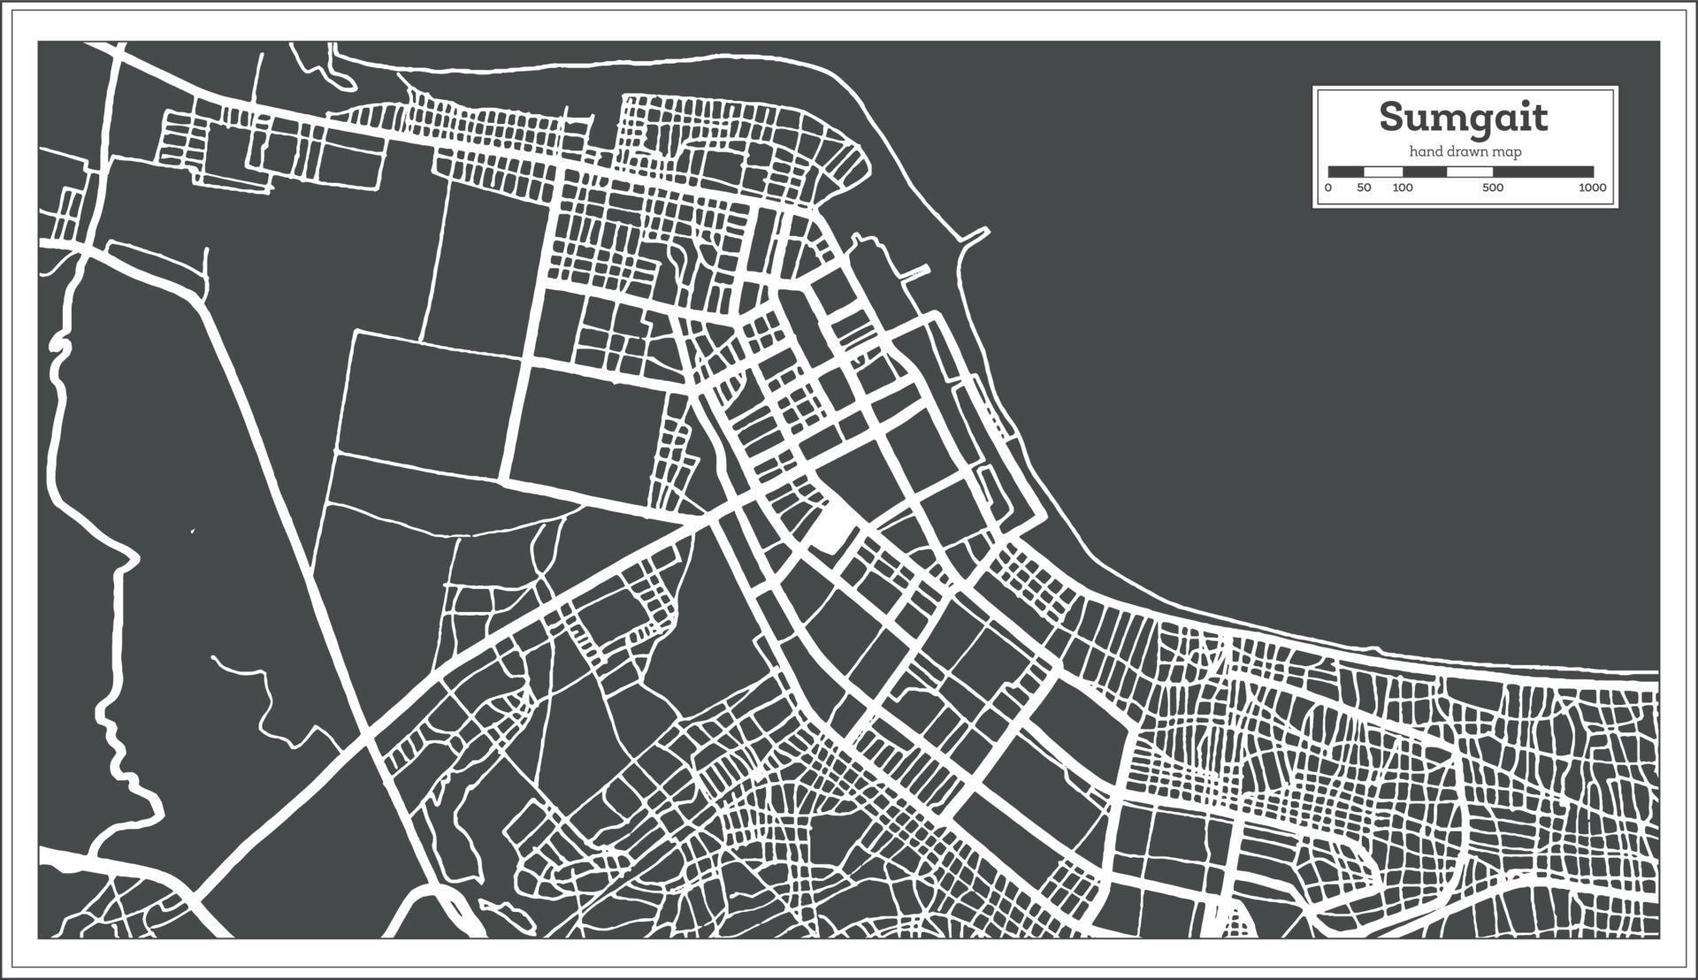 Sumgait Azerbaijan City Map in Black and White Color in Retro Style. Outline Map. vector